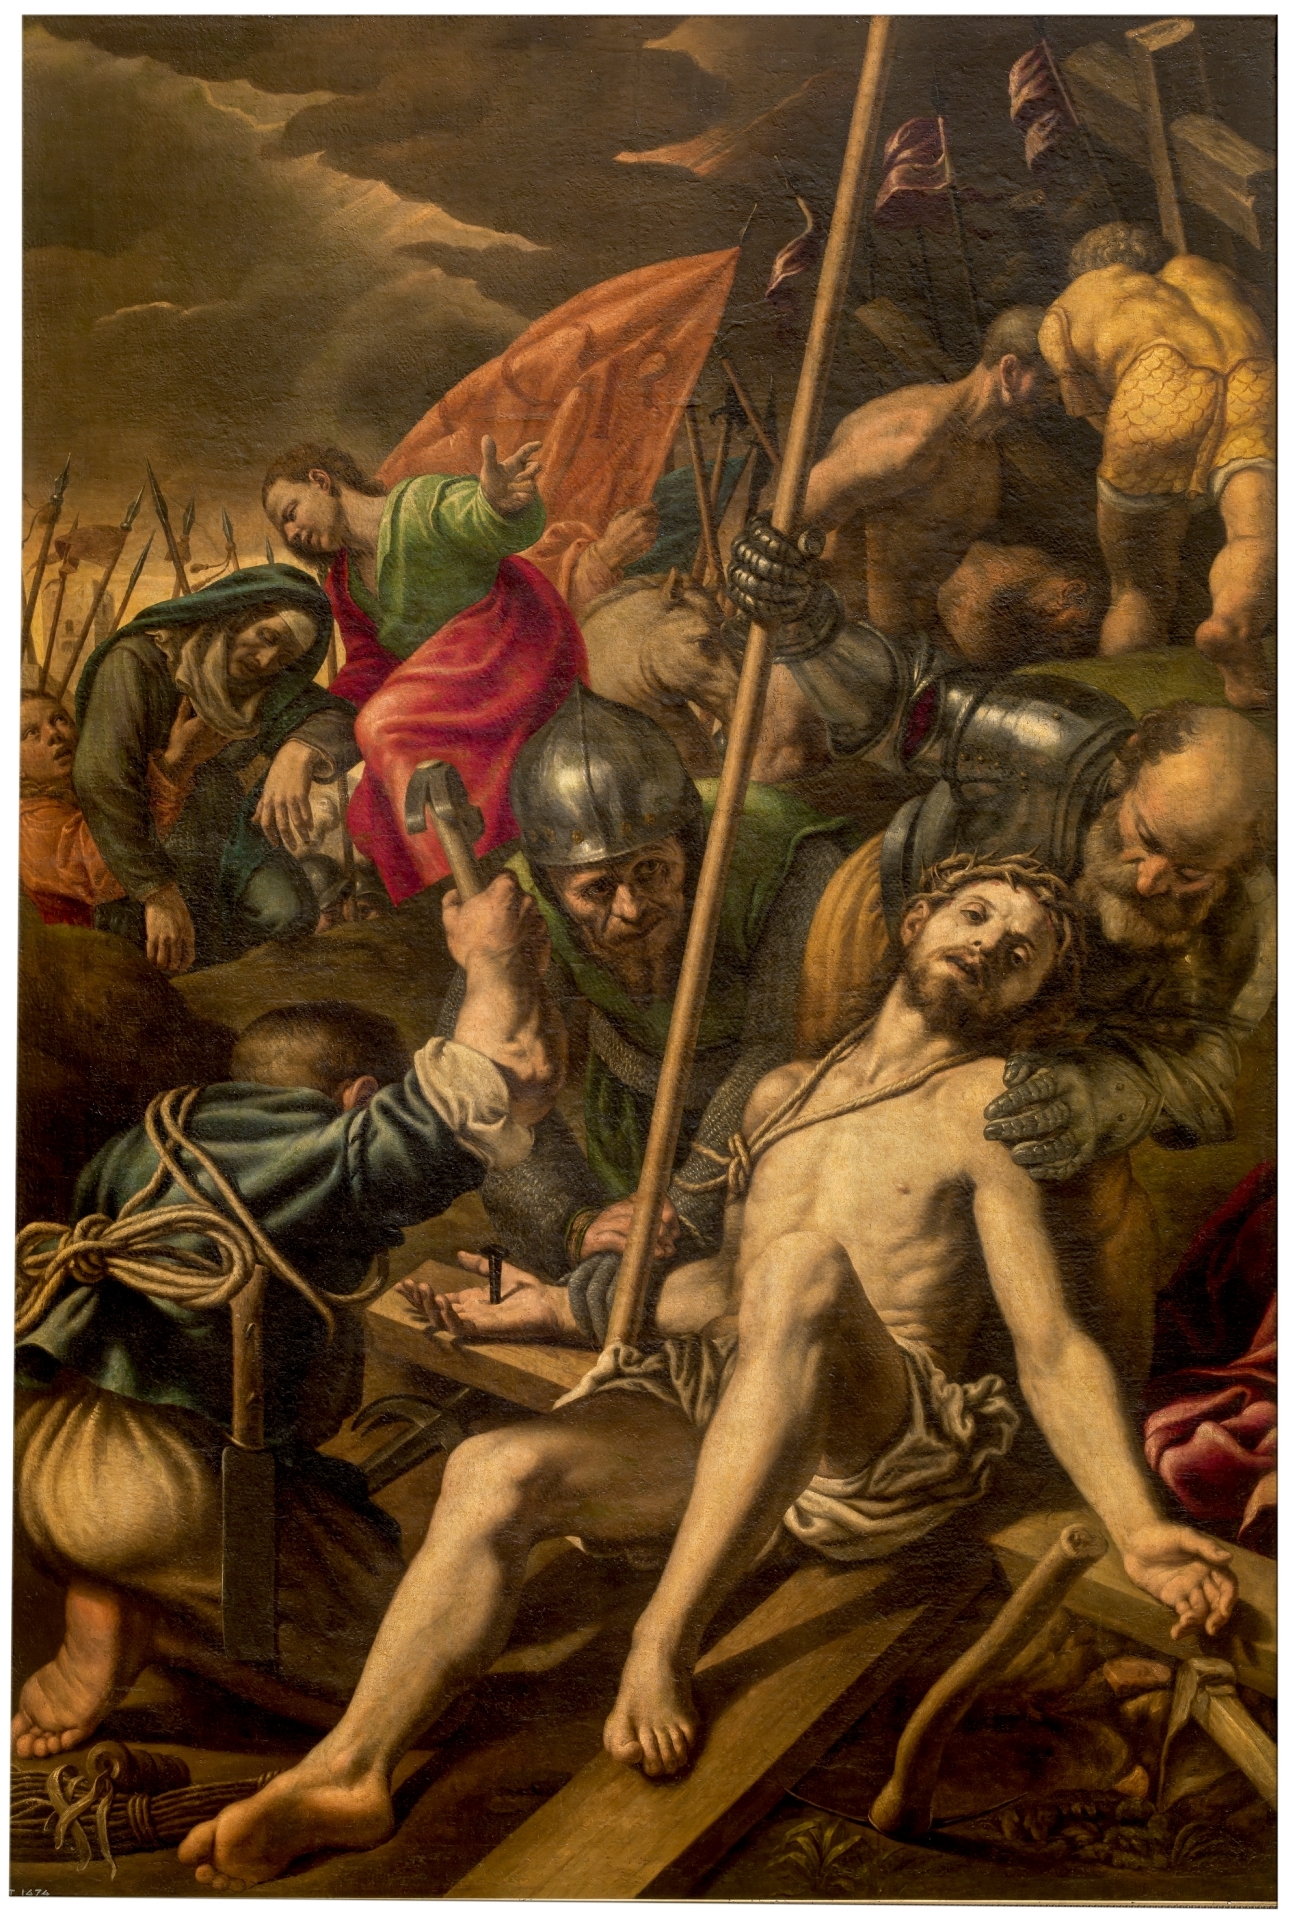 D Jesus Is Nailed To The Cross Art Print Home Decor Wall Art Poster